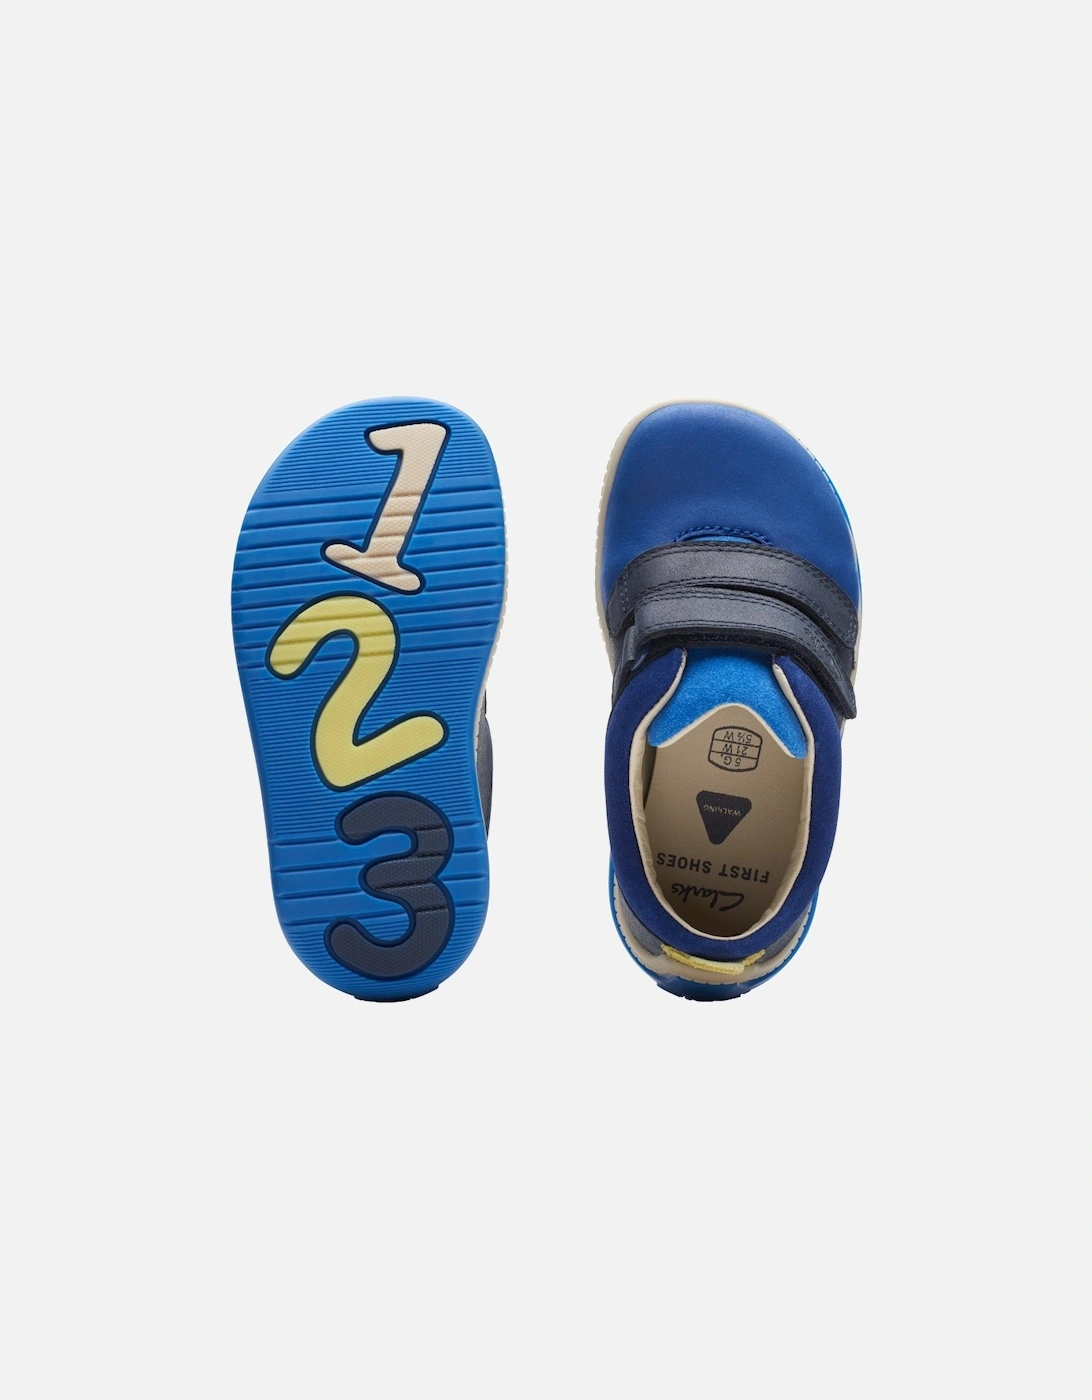 Noodle Fun T Boys First Shoes